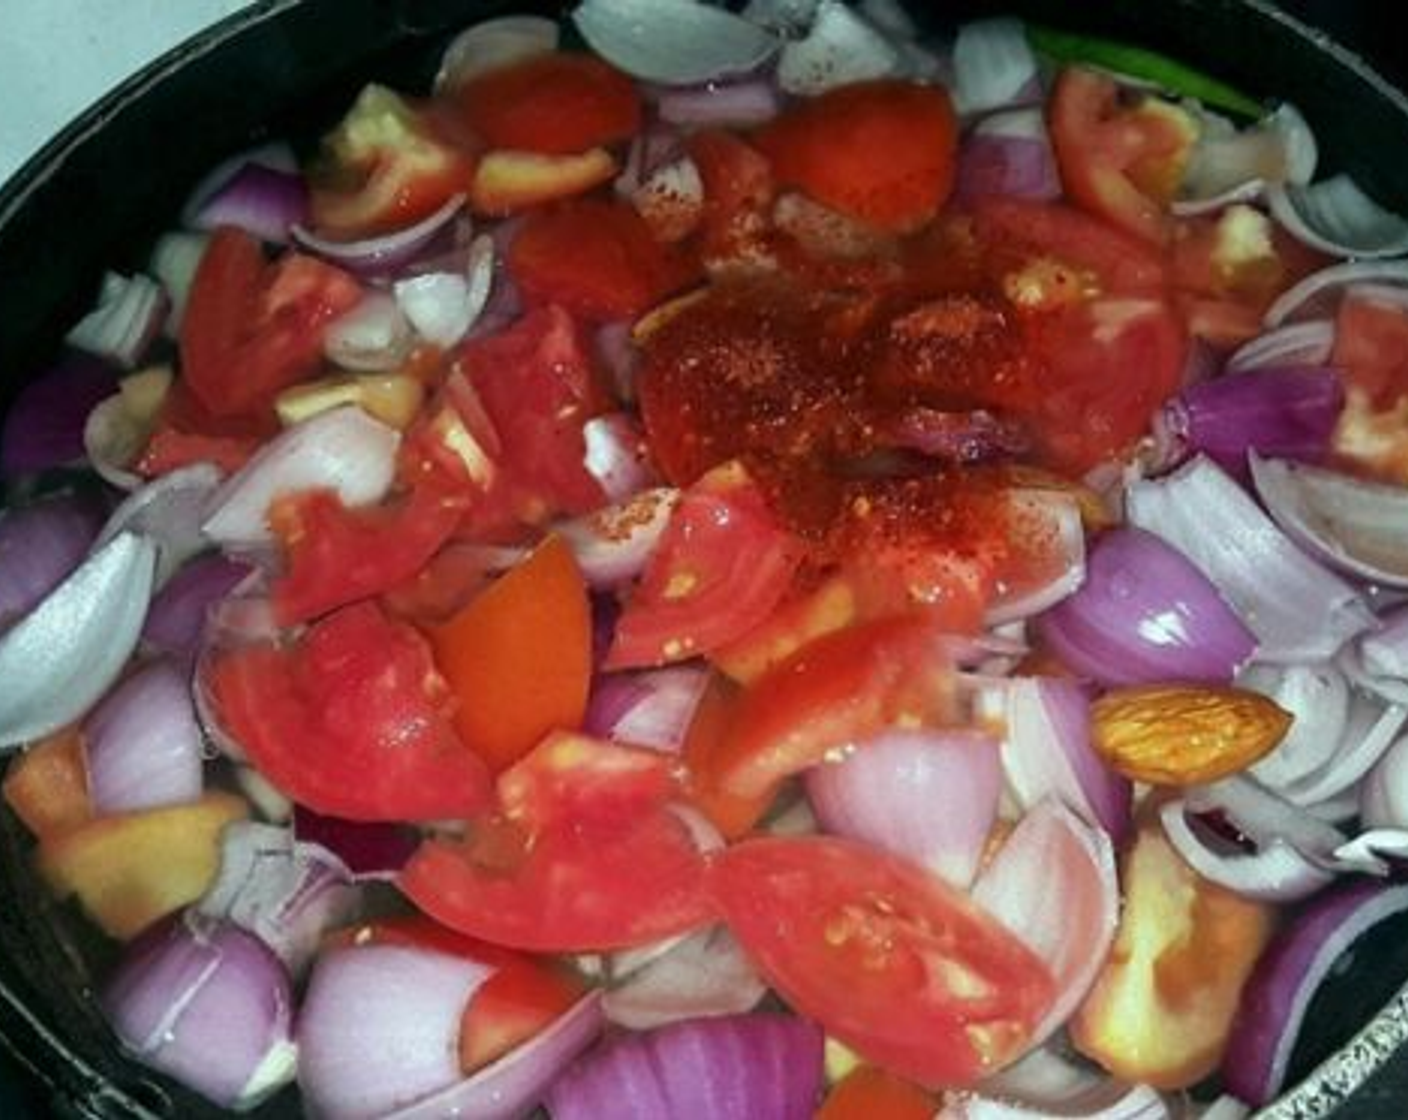 step 1 Take Water (to taste) in a pan, add Onions (2), Tomatoes (3), Fresh Ginger (1 Tbsp), Garlic (4 cloves), Butter (1/2 Tbsp), Red Chili Powder (1 tsp), Bay Leaf (1), Cinnamon Stick (1/2 in), and Green Chili Pepper (1).